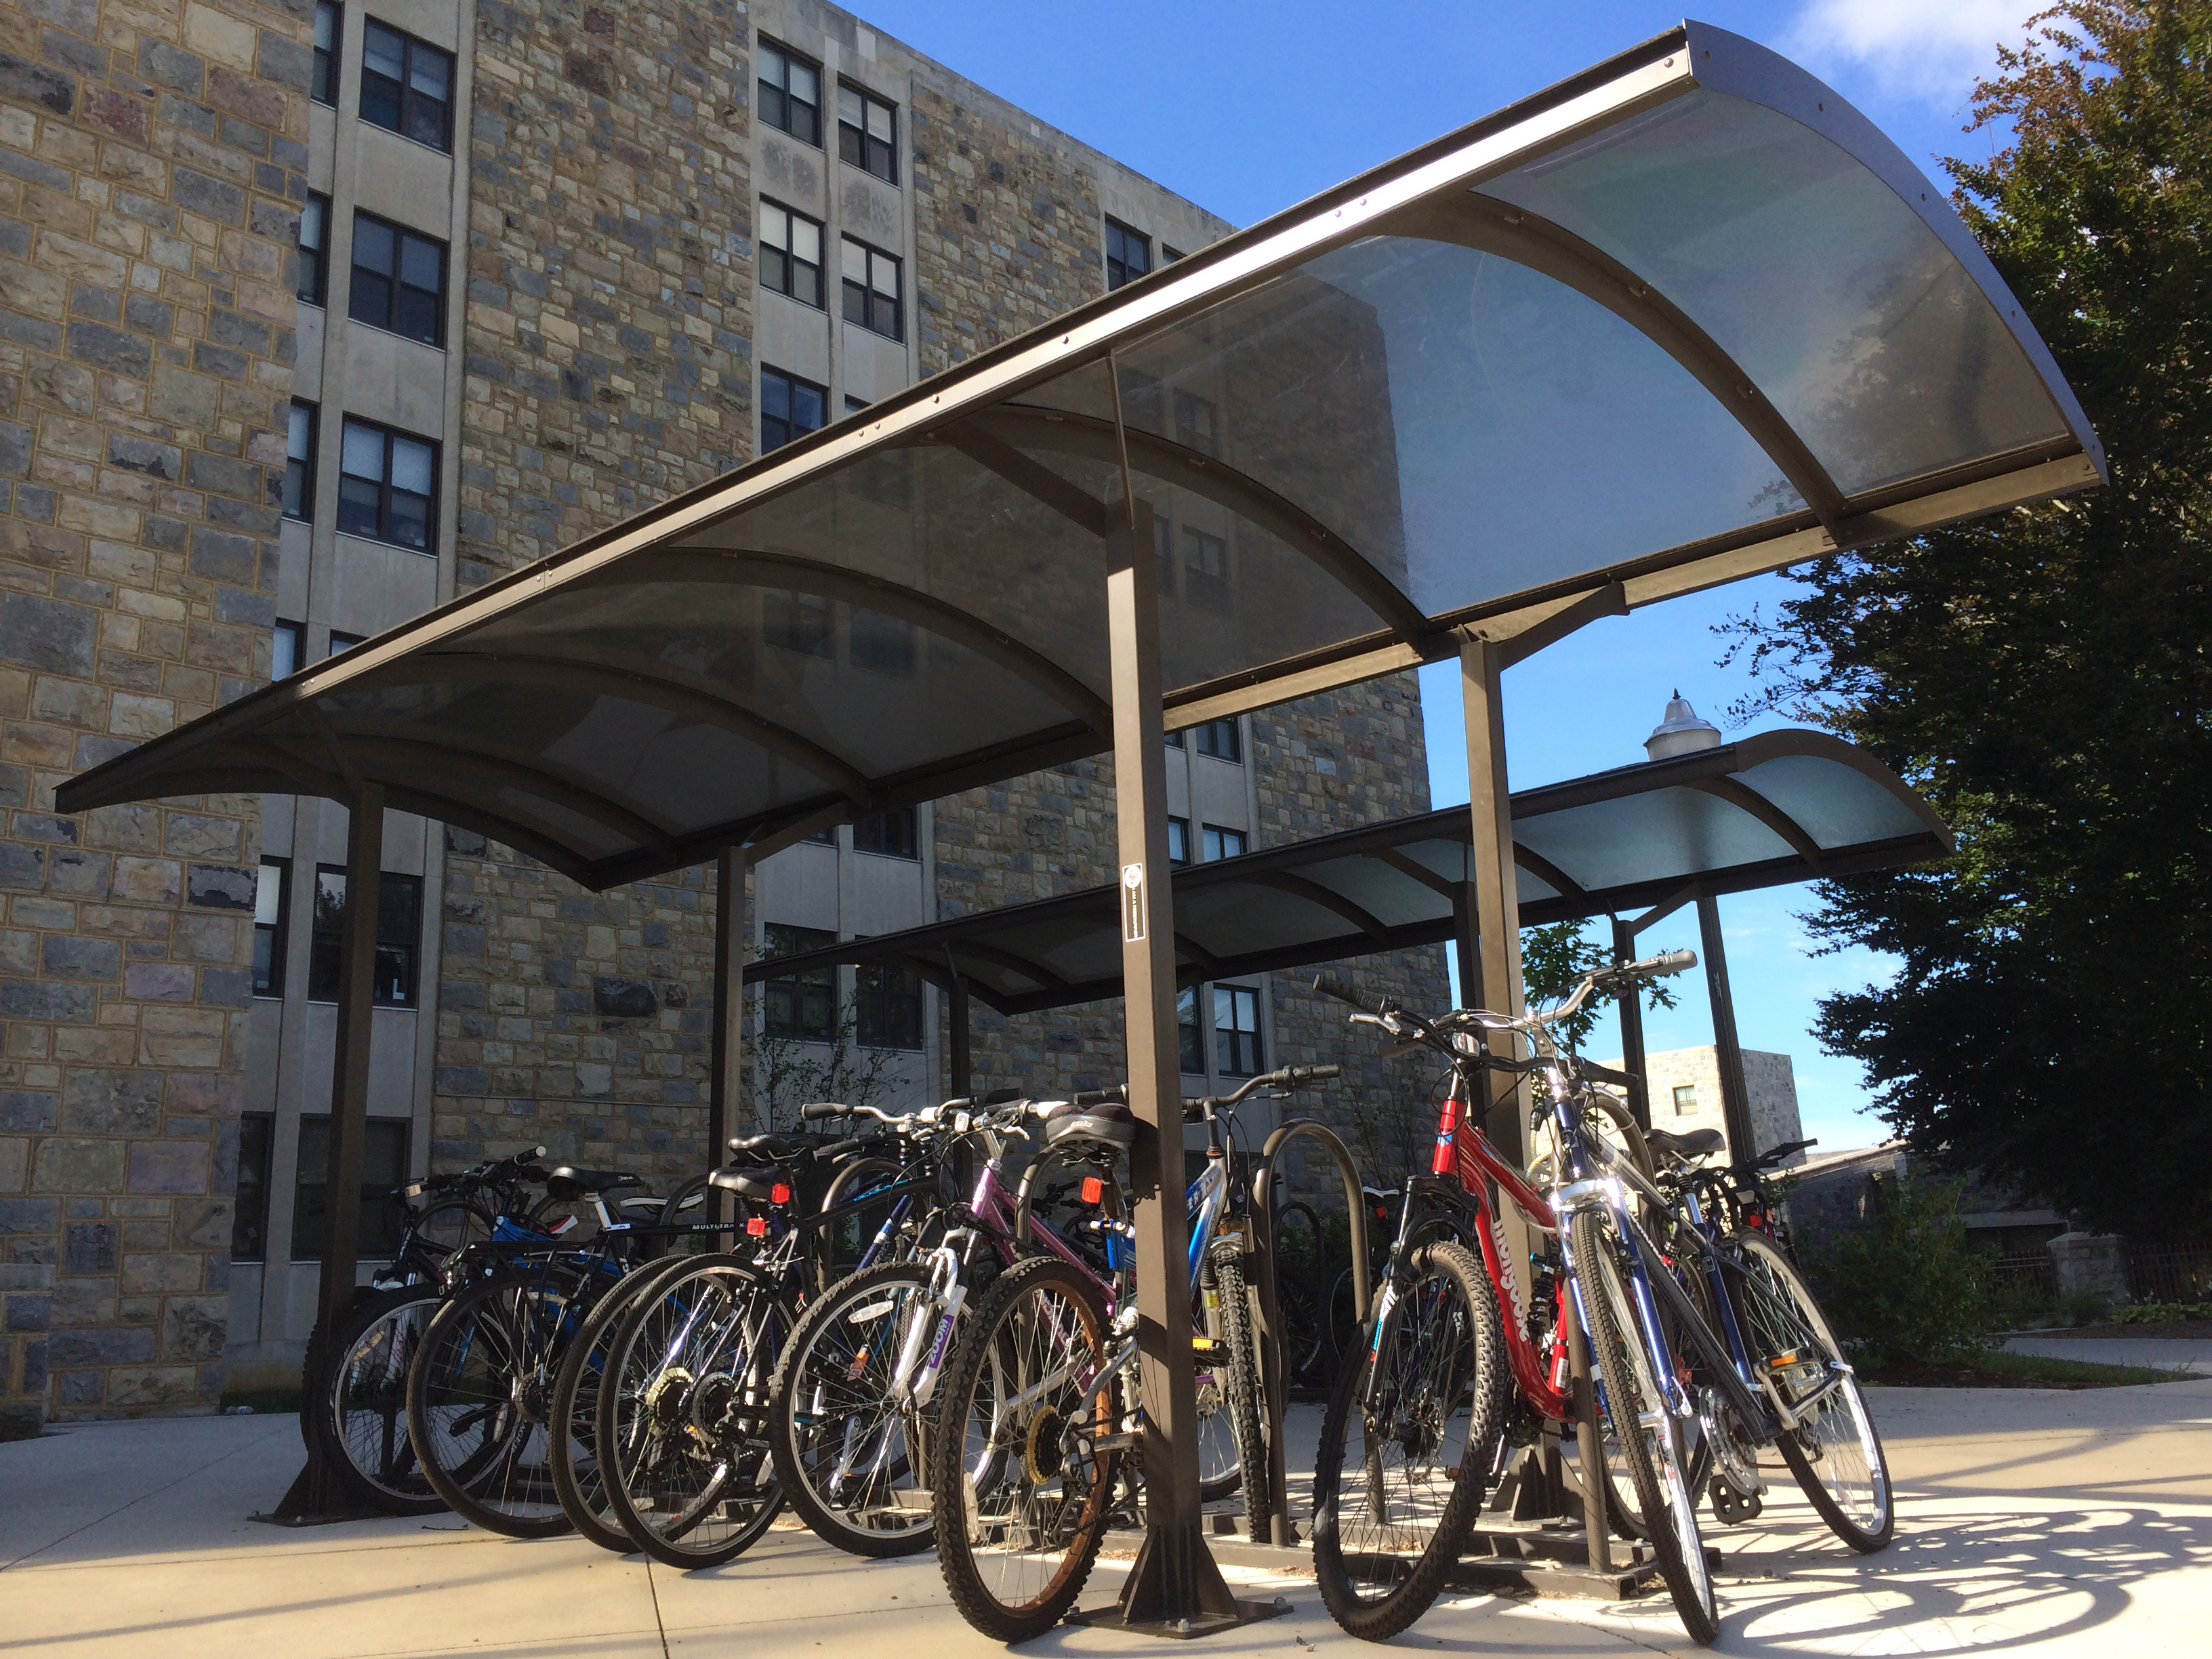 Covered bicycle racks outside one of the residential halls